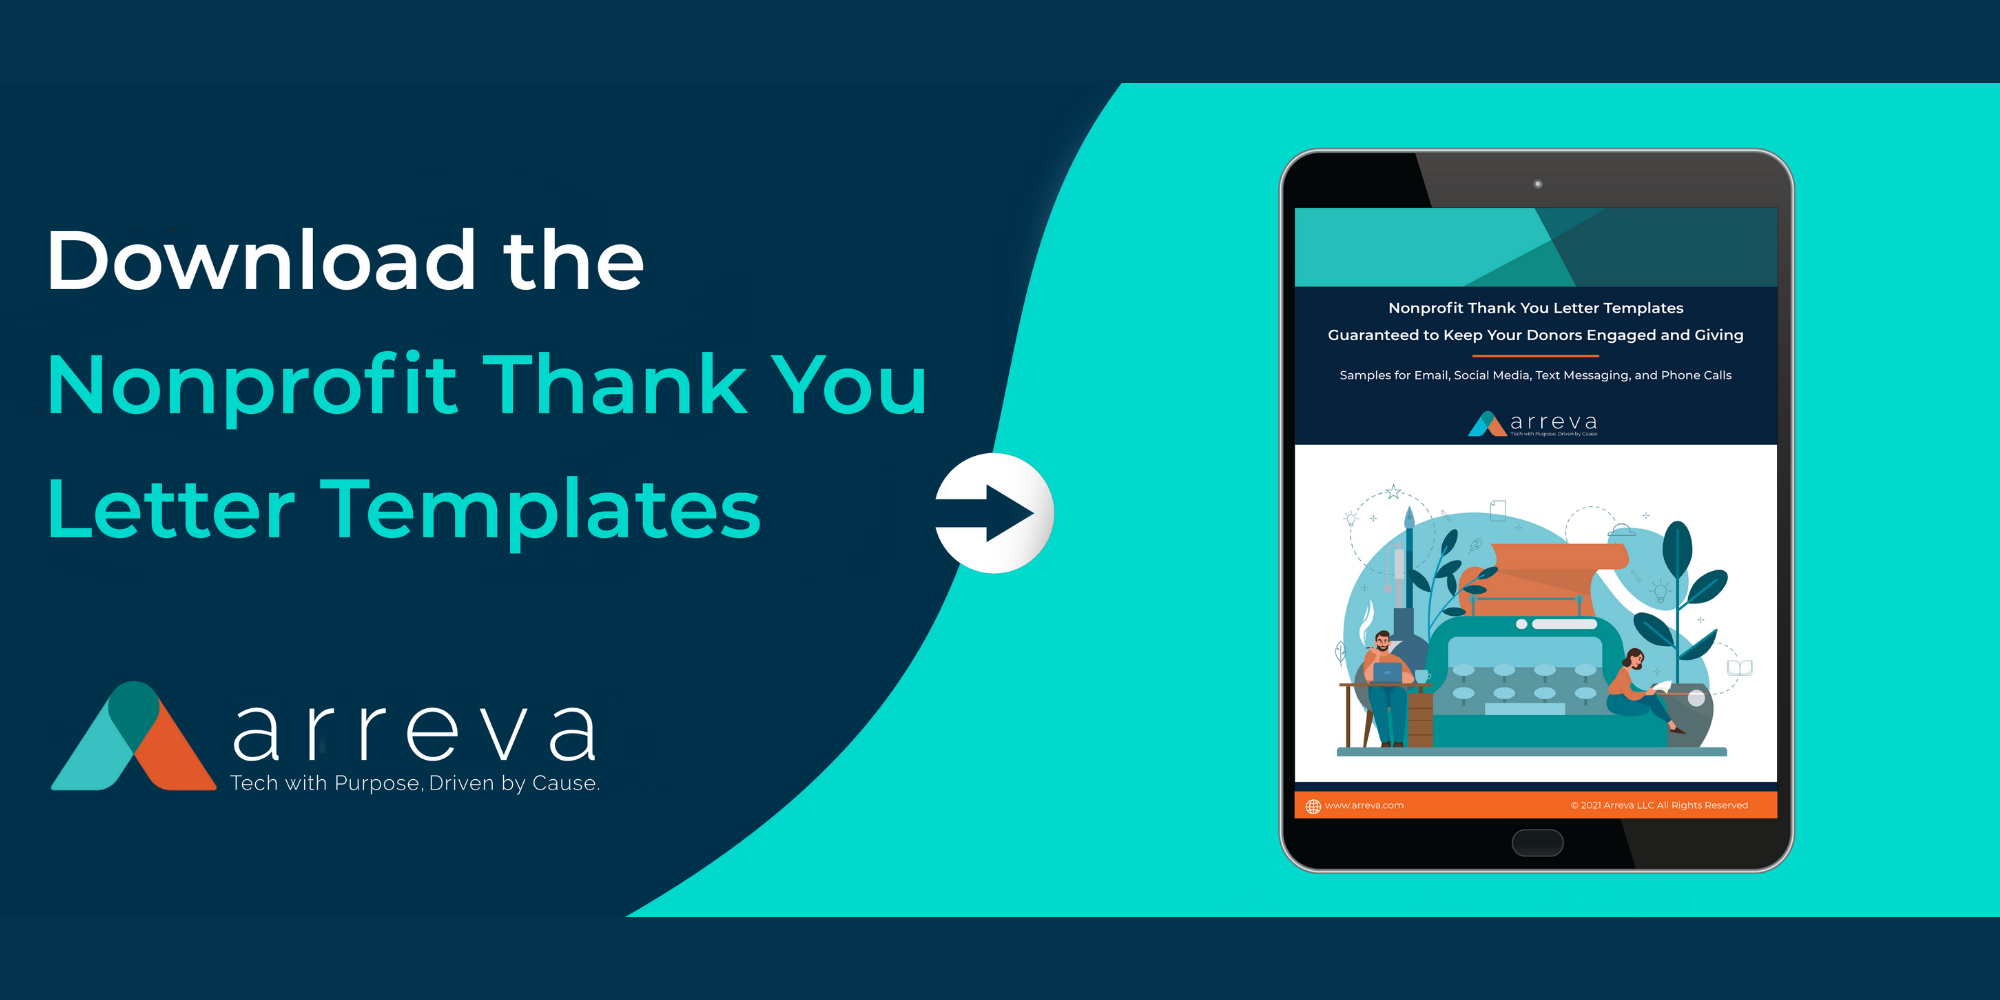 Download the Nonprofit Thank You Letter Templates